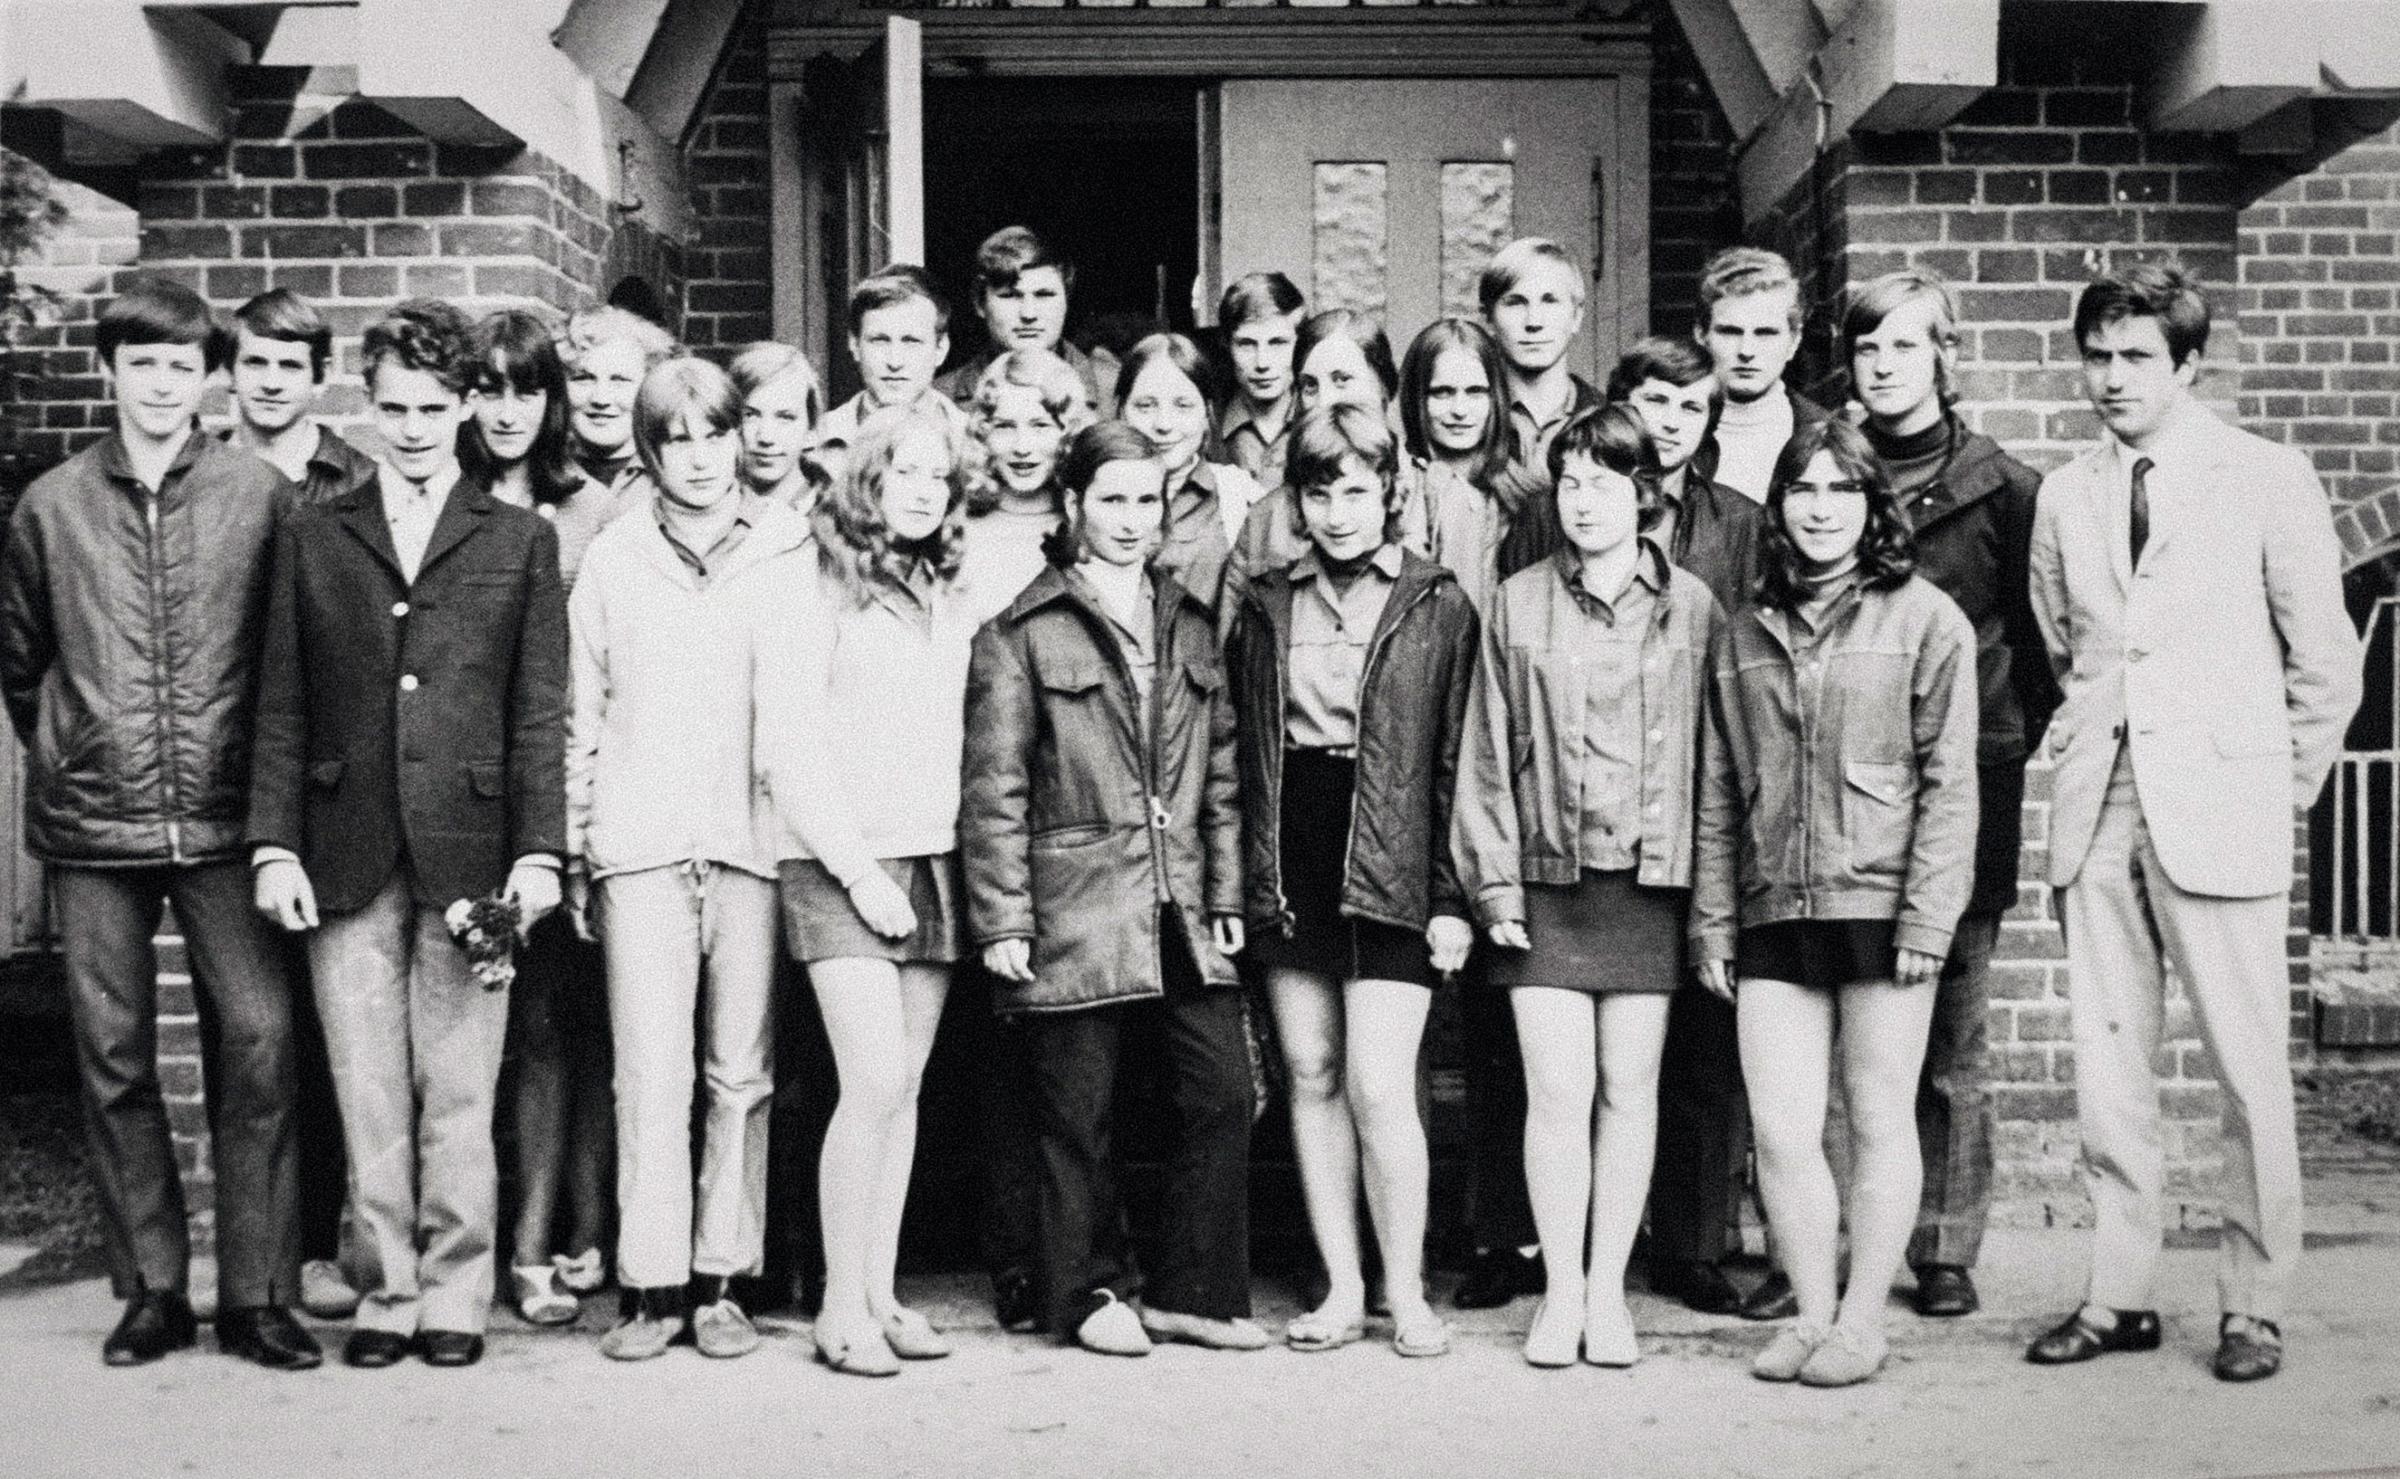 Angela Kasner (center, second row) in a class photo from 1971 of the 10th class of the Advanced High School (EOS) in Templin, Germany.